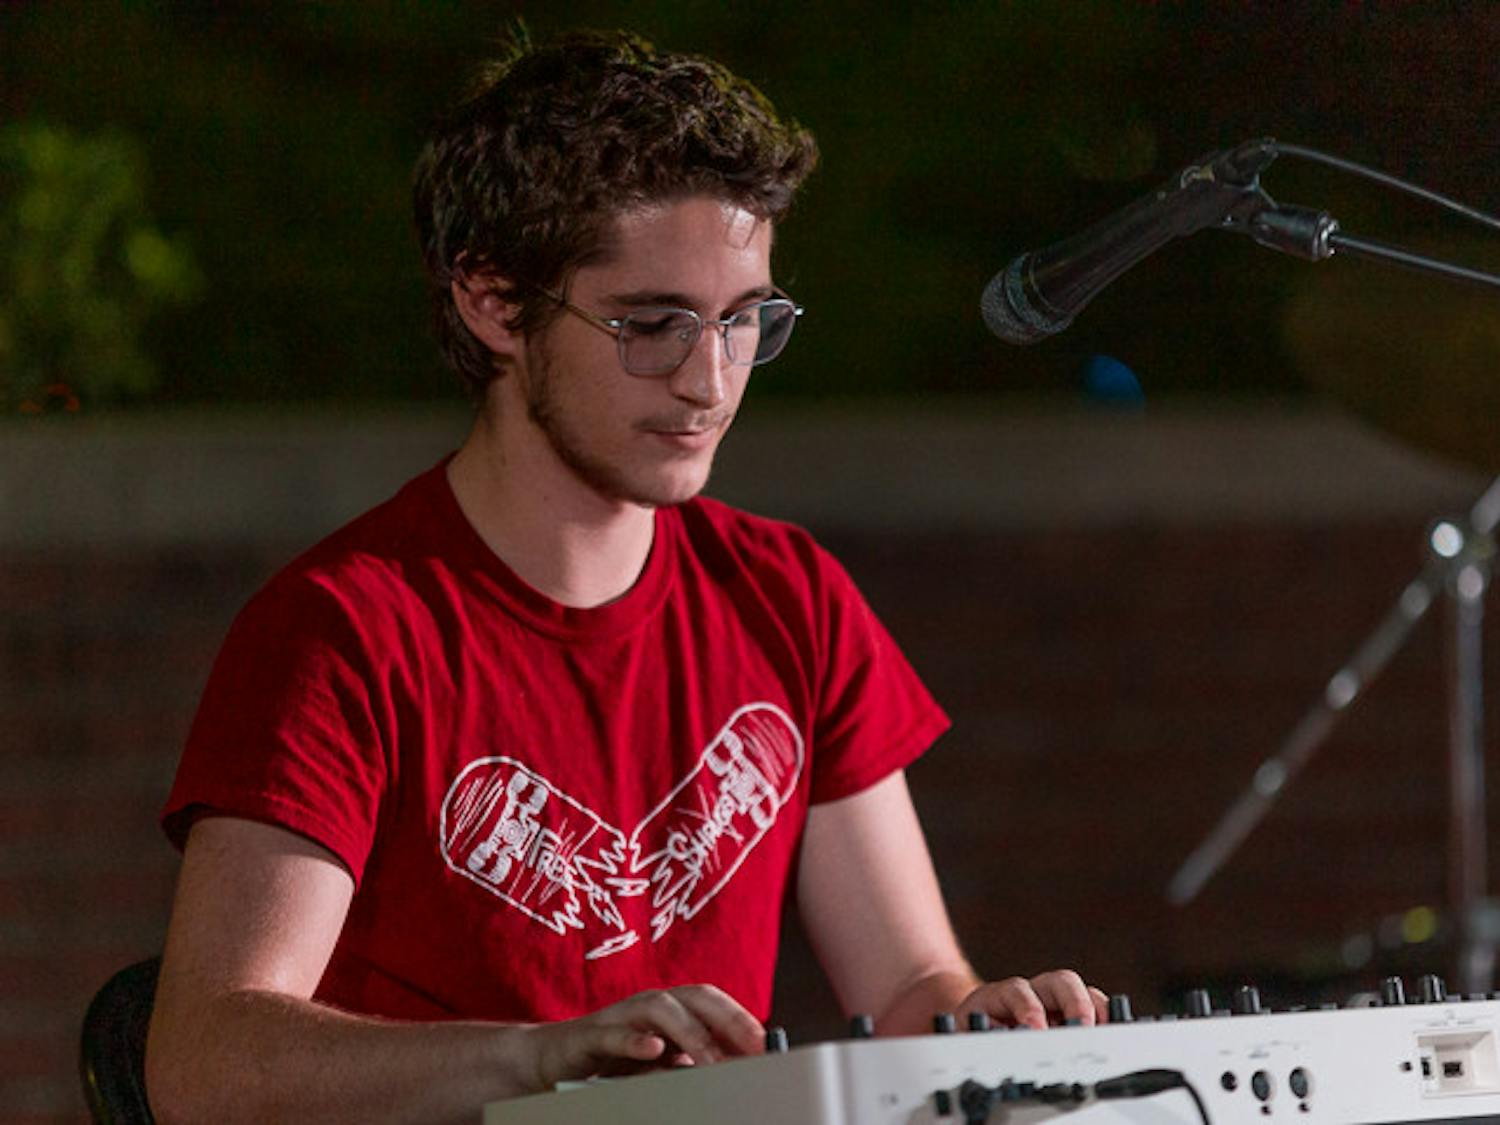 Second-year computer science student Wyatt Carhart plays the keyboard during Henry and the Sleepers' performance at the Battle of the Bands on Oct. 5, 2022. The competition brought acappella, folk, rap and rock to the Russel House Patio in a variety of performances.